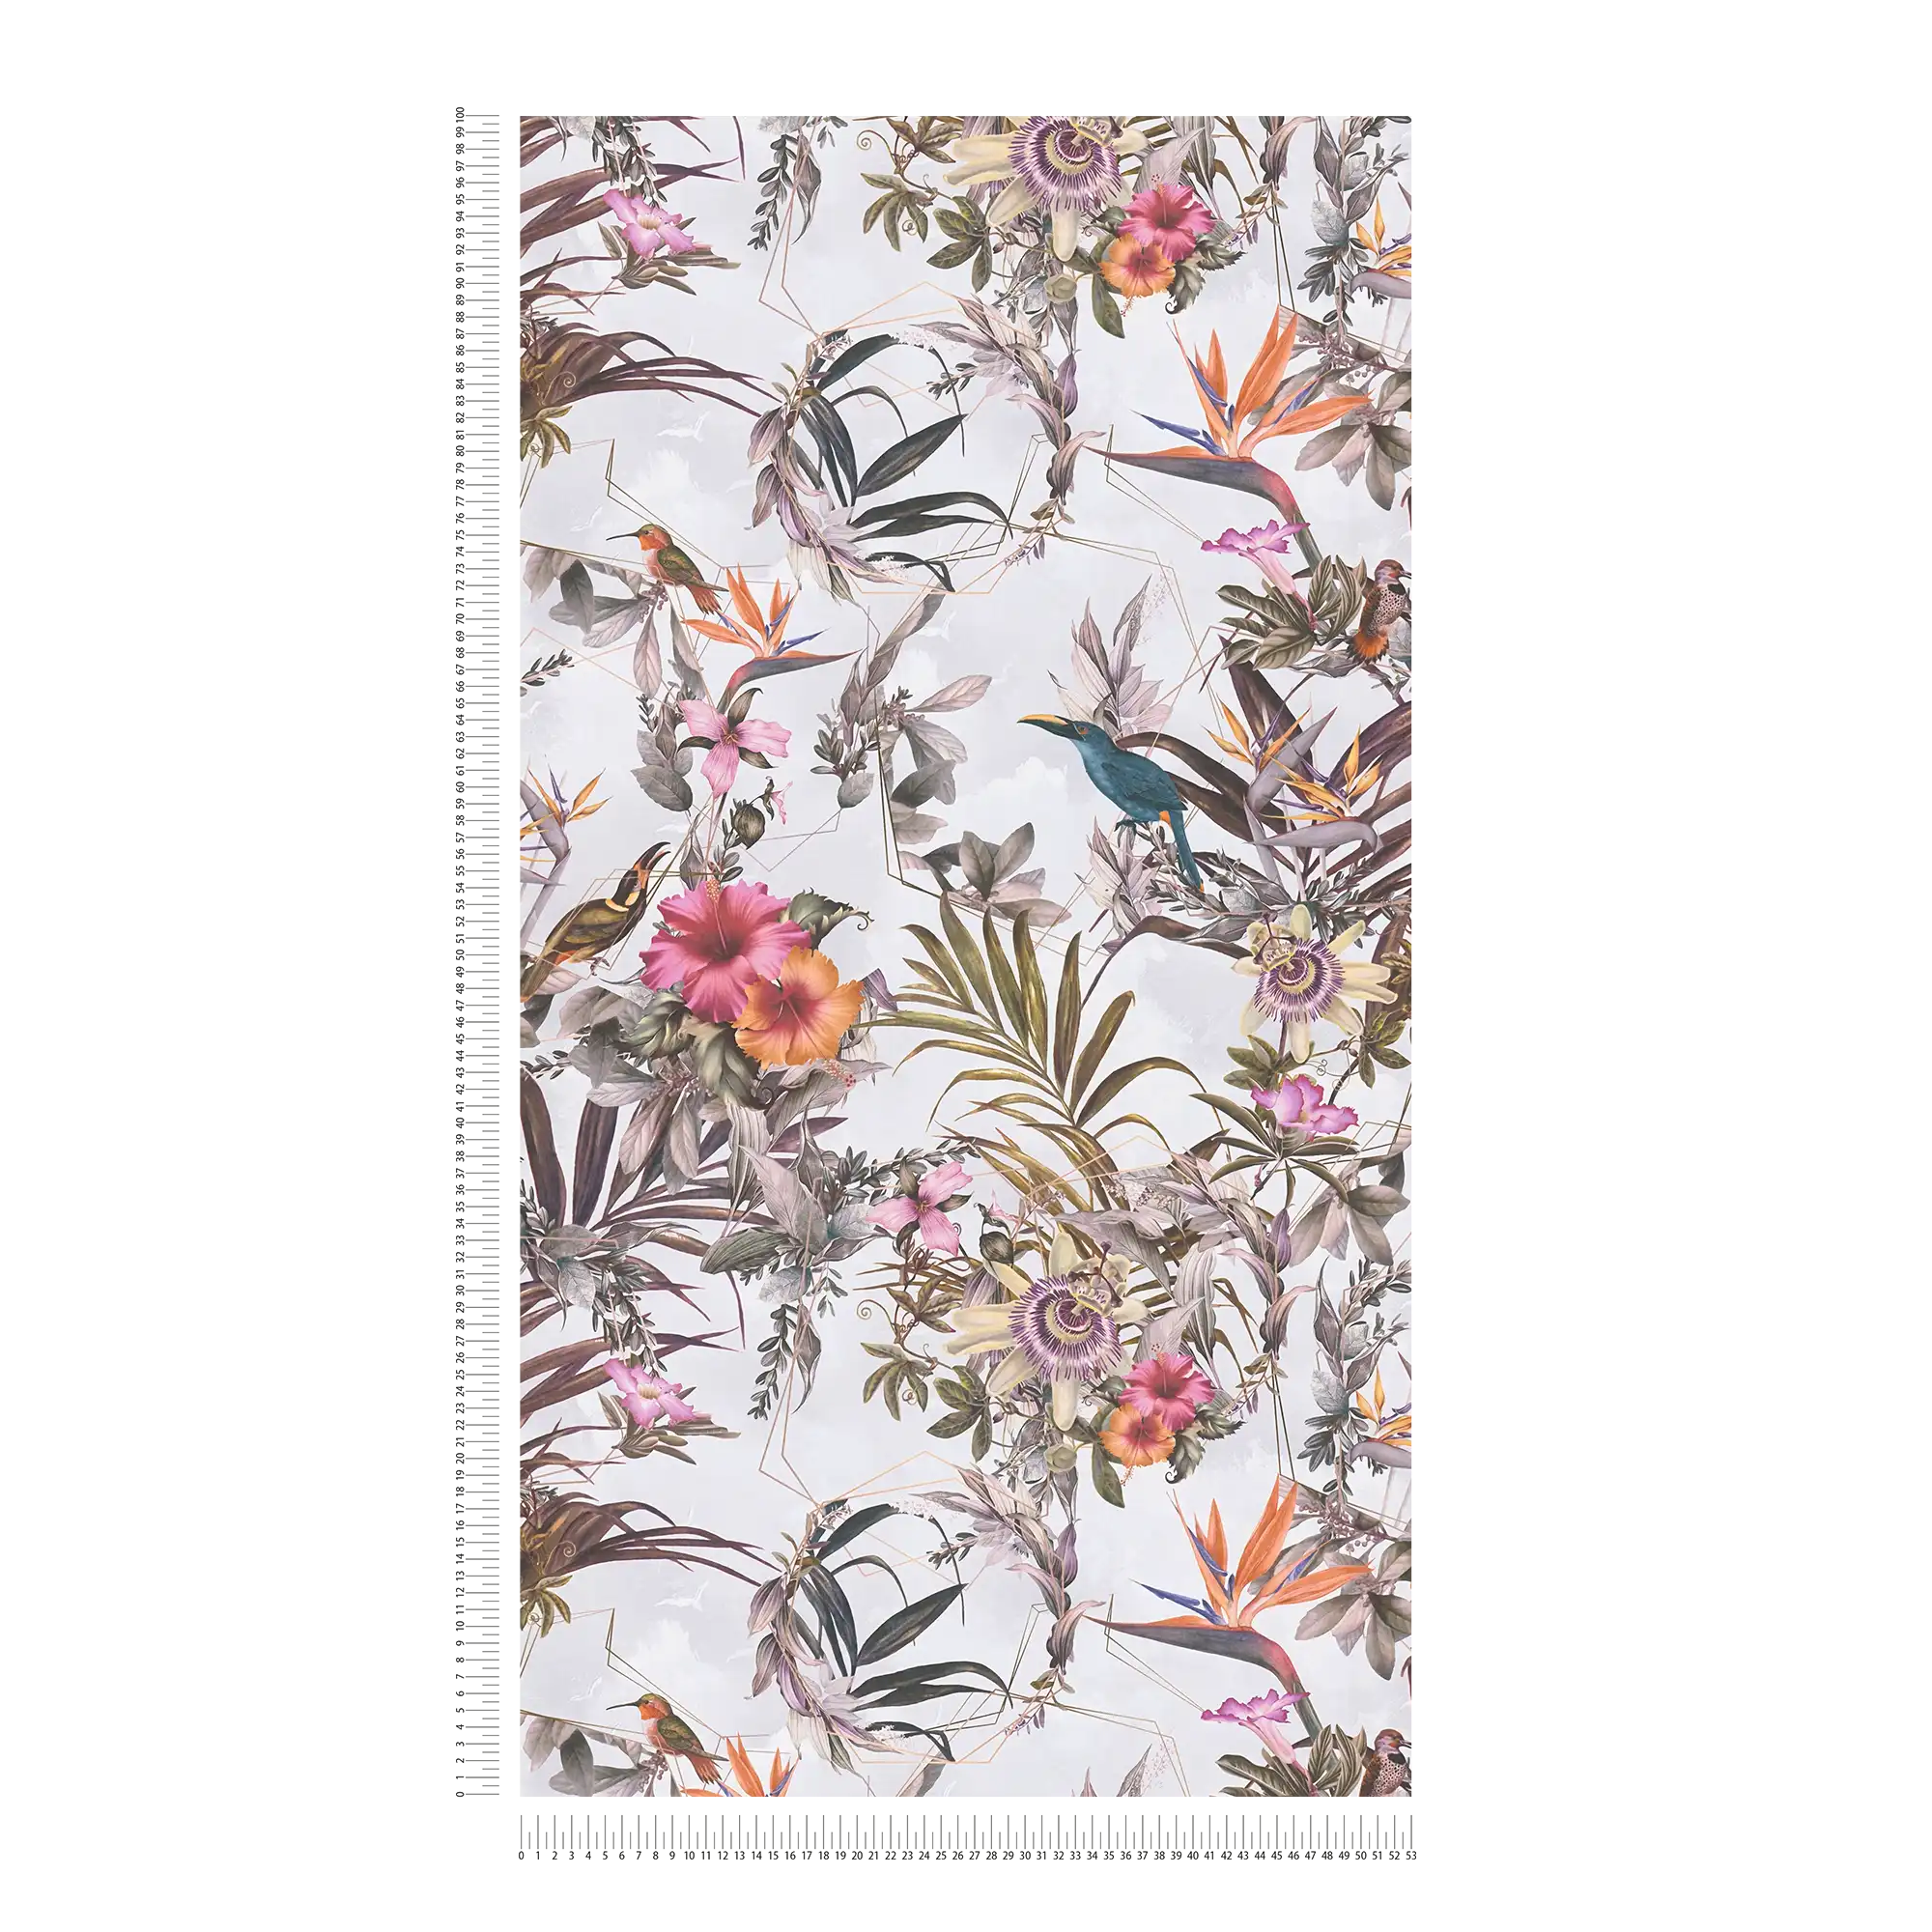             Watercolour style tropical flowers wallpaper - grey, green
        